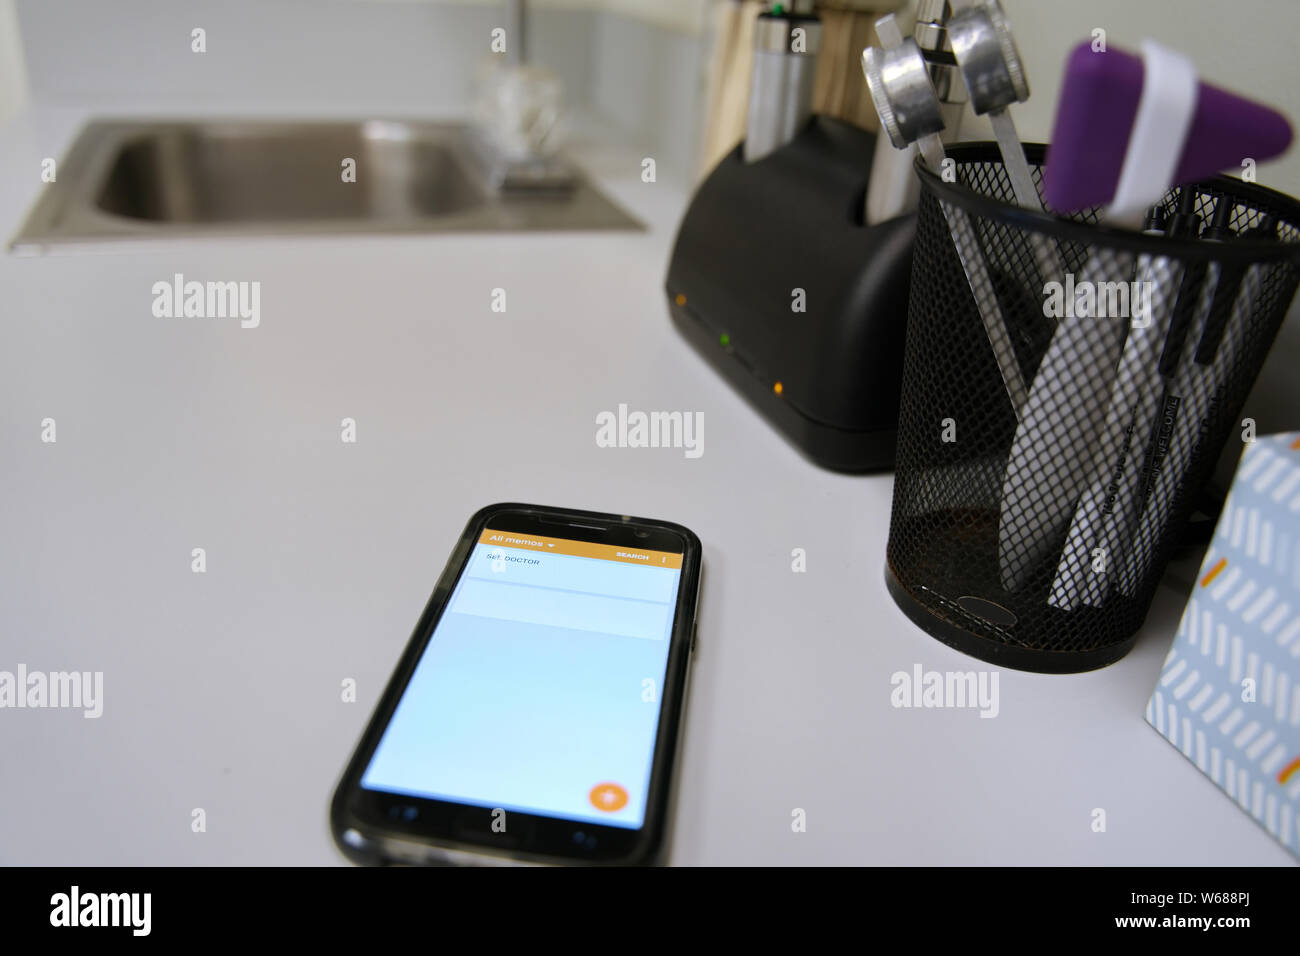 Smartphone on clinic table displaying an important note to seek medical attention. Stock Photo